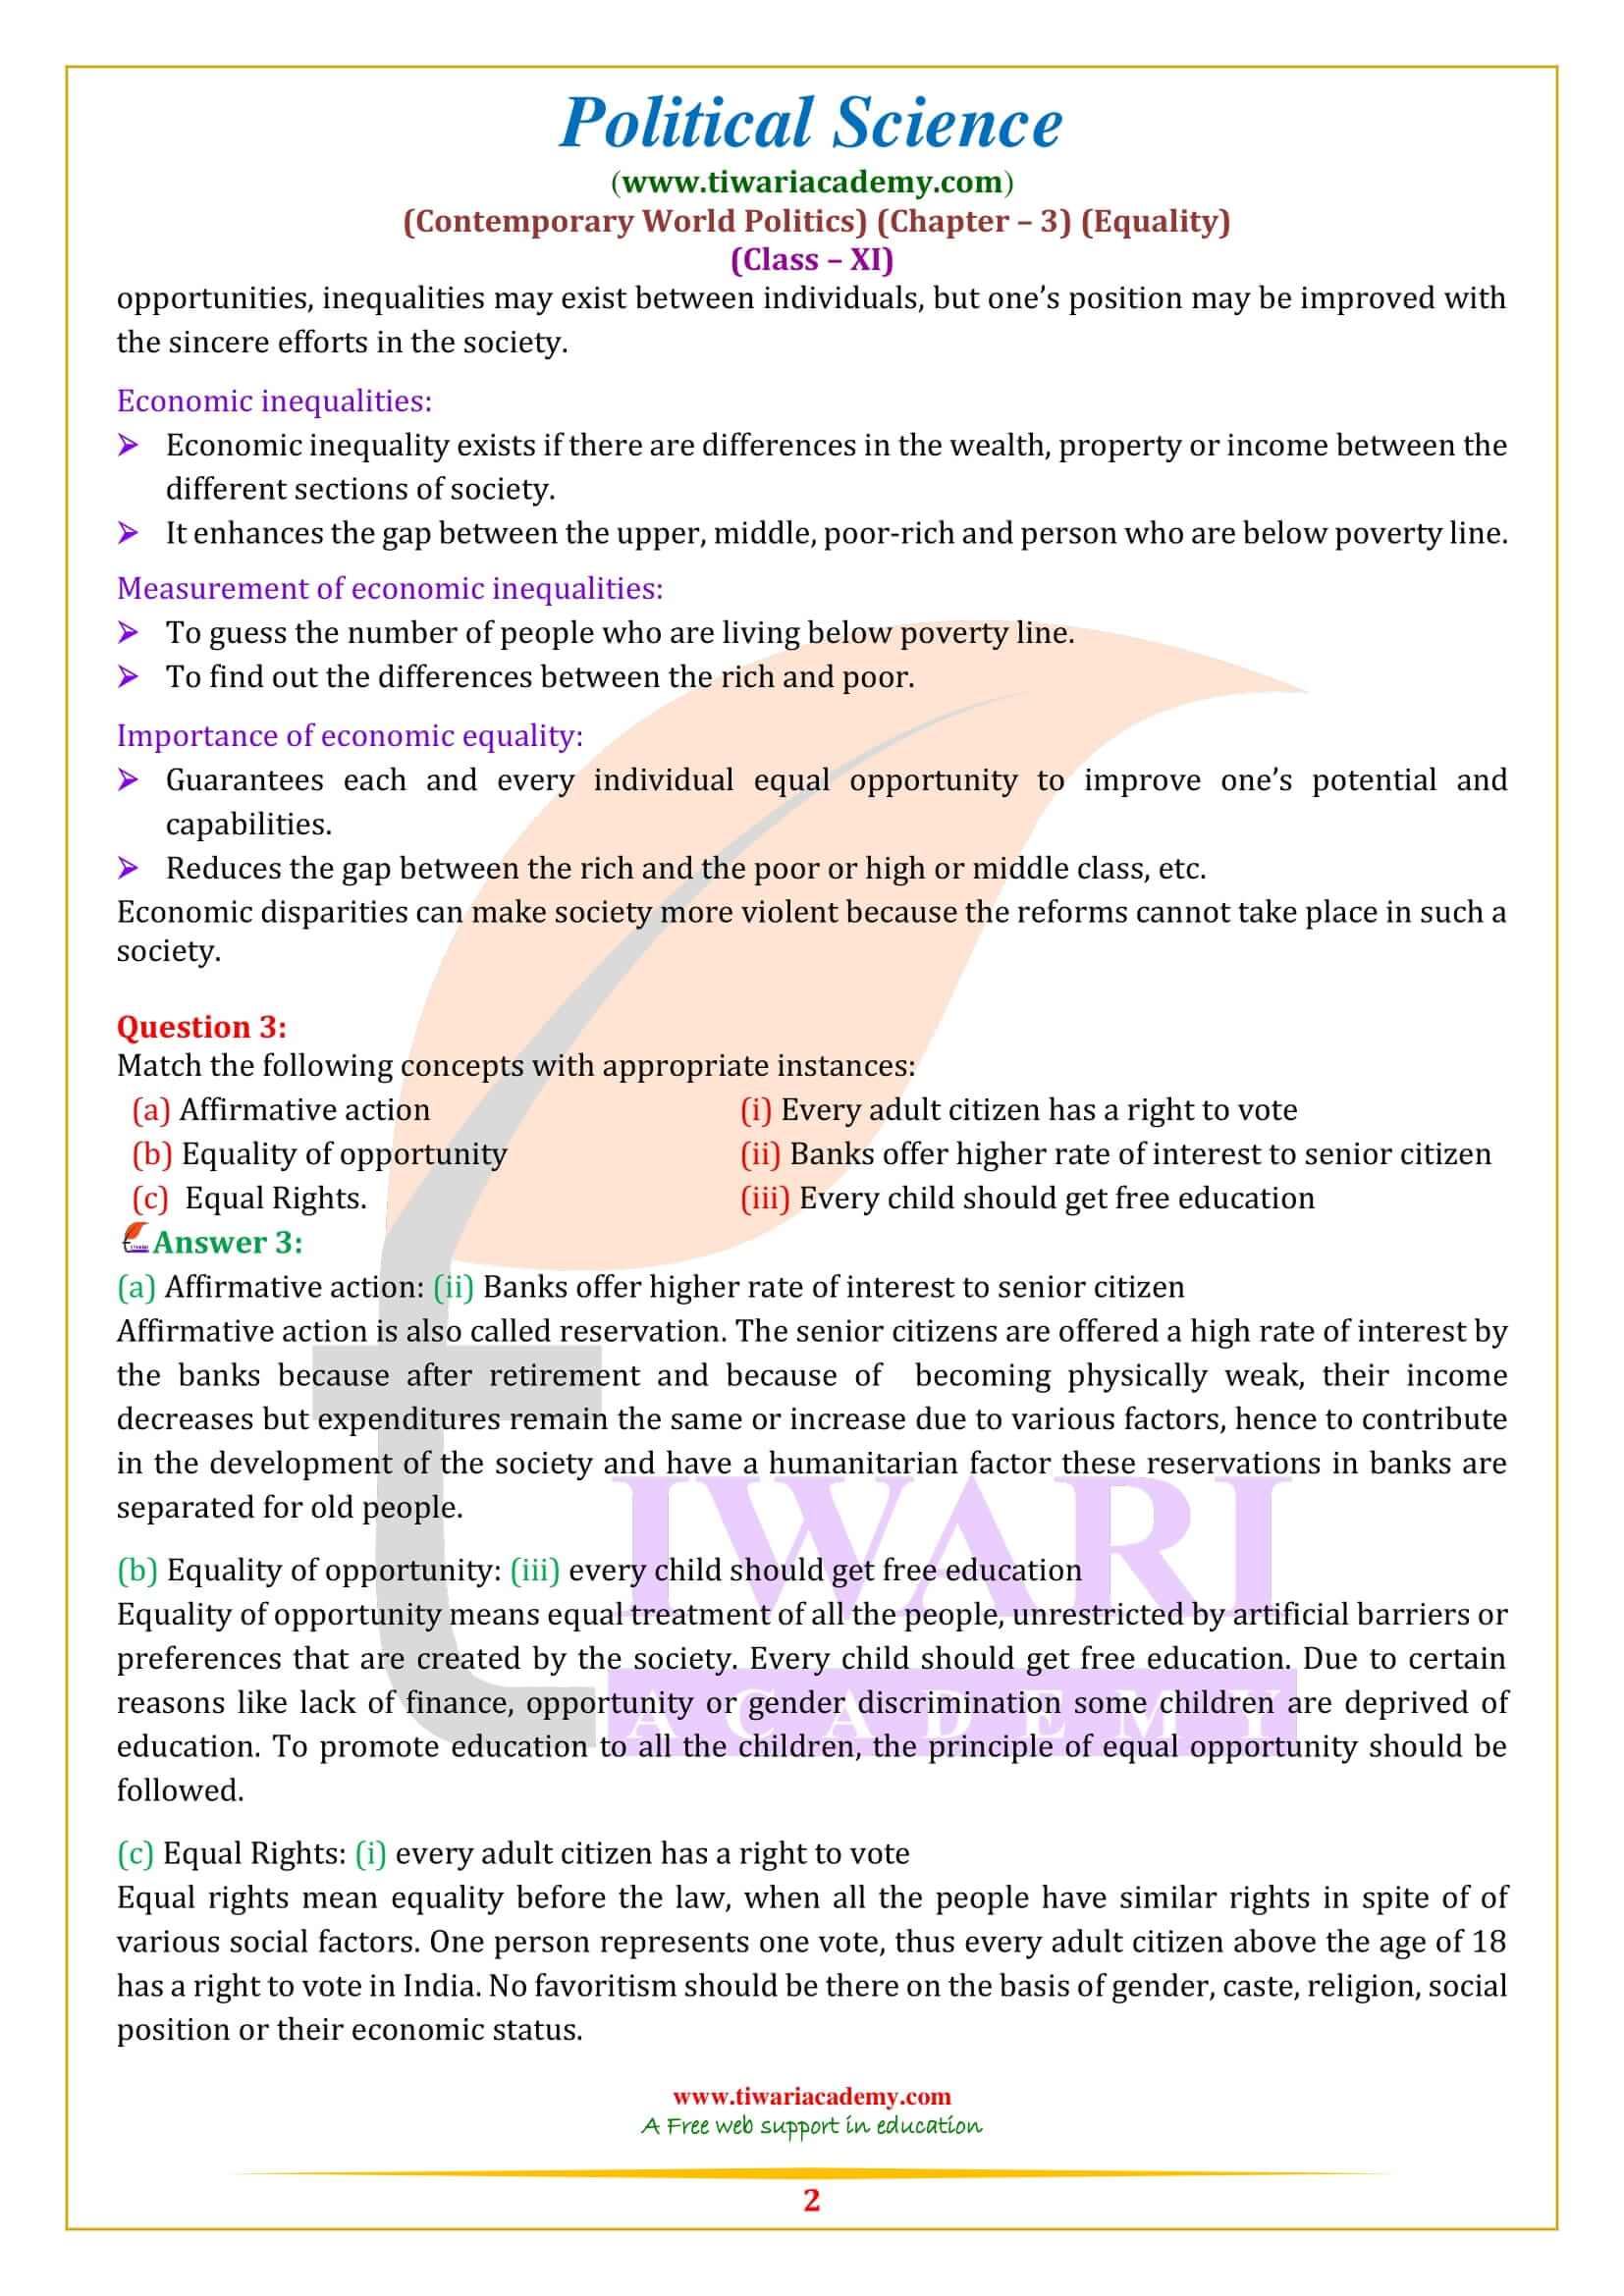 NCERT Solutions for Class 11 Political Science Chapter 3